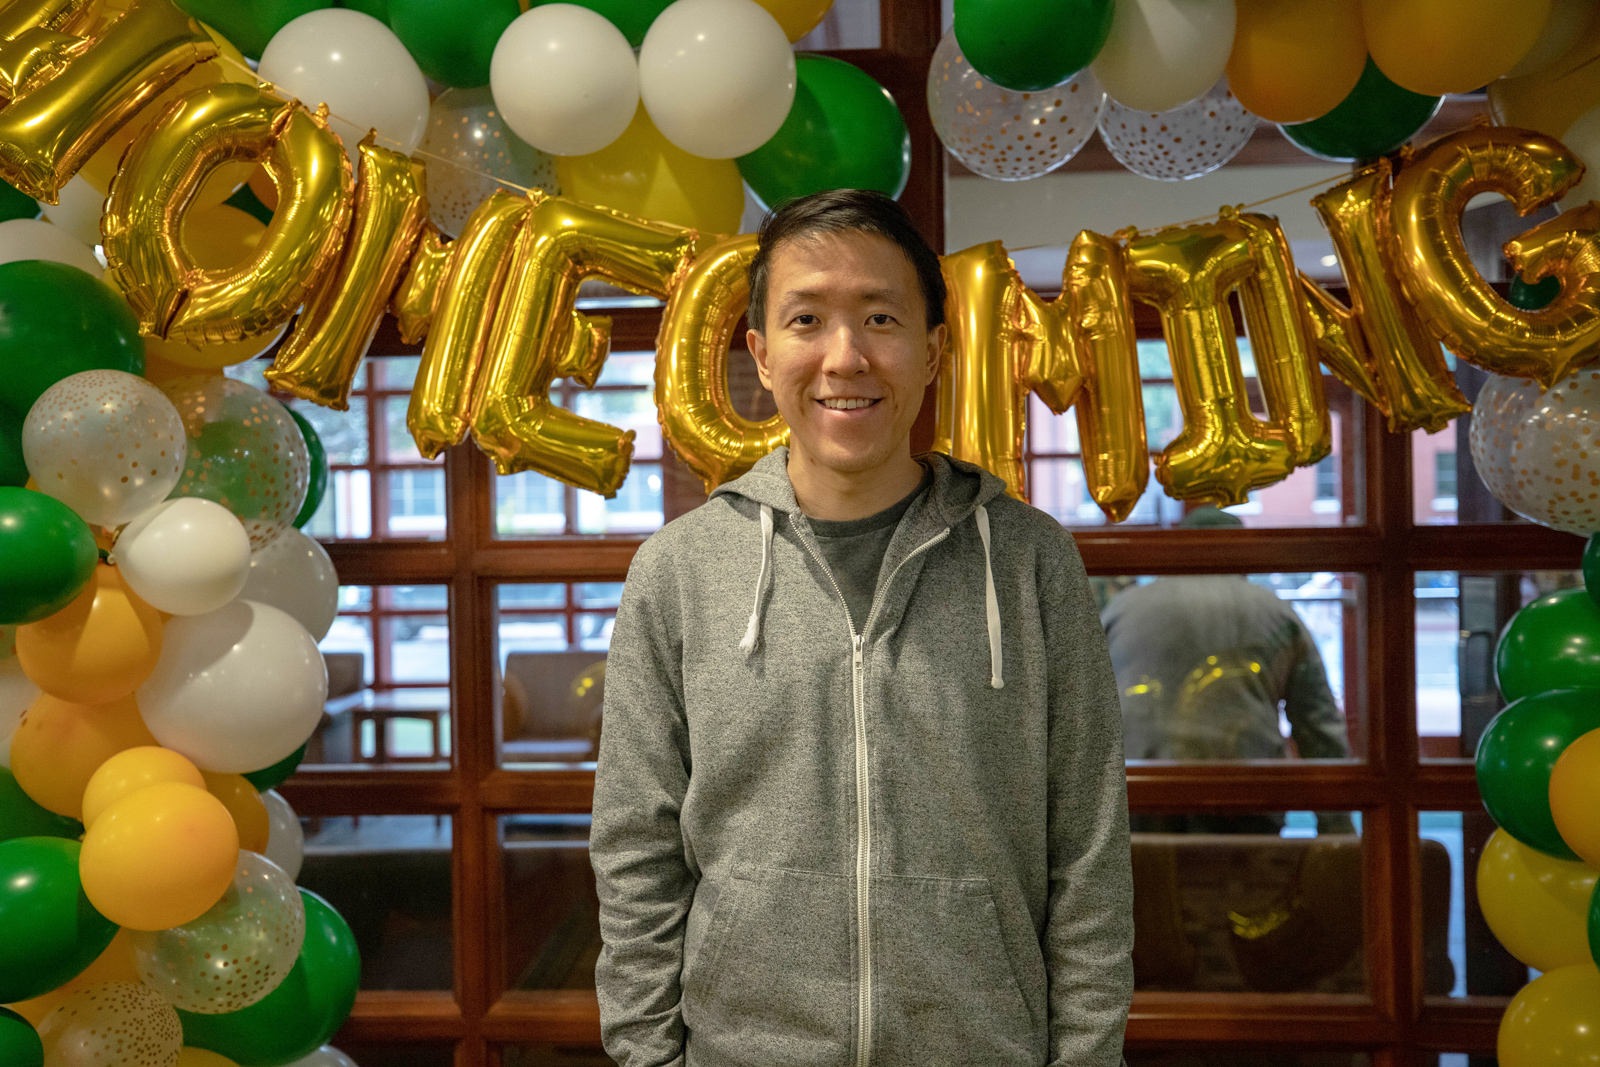 Daniel Kiang in front of green and gold balloons